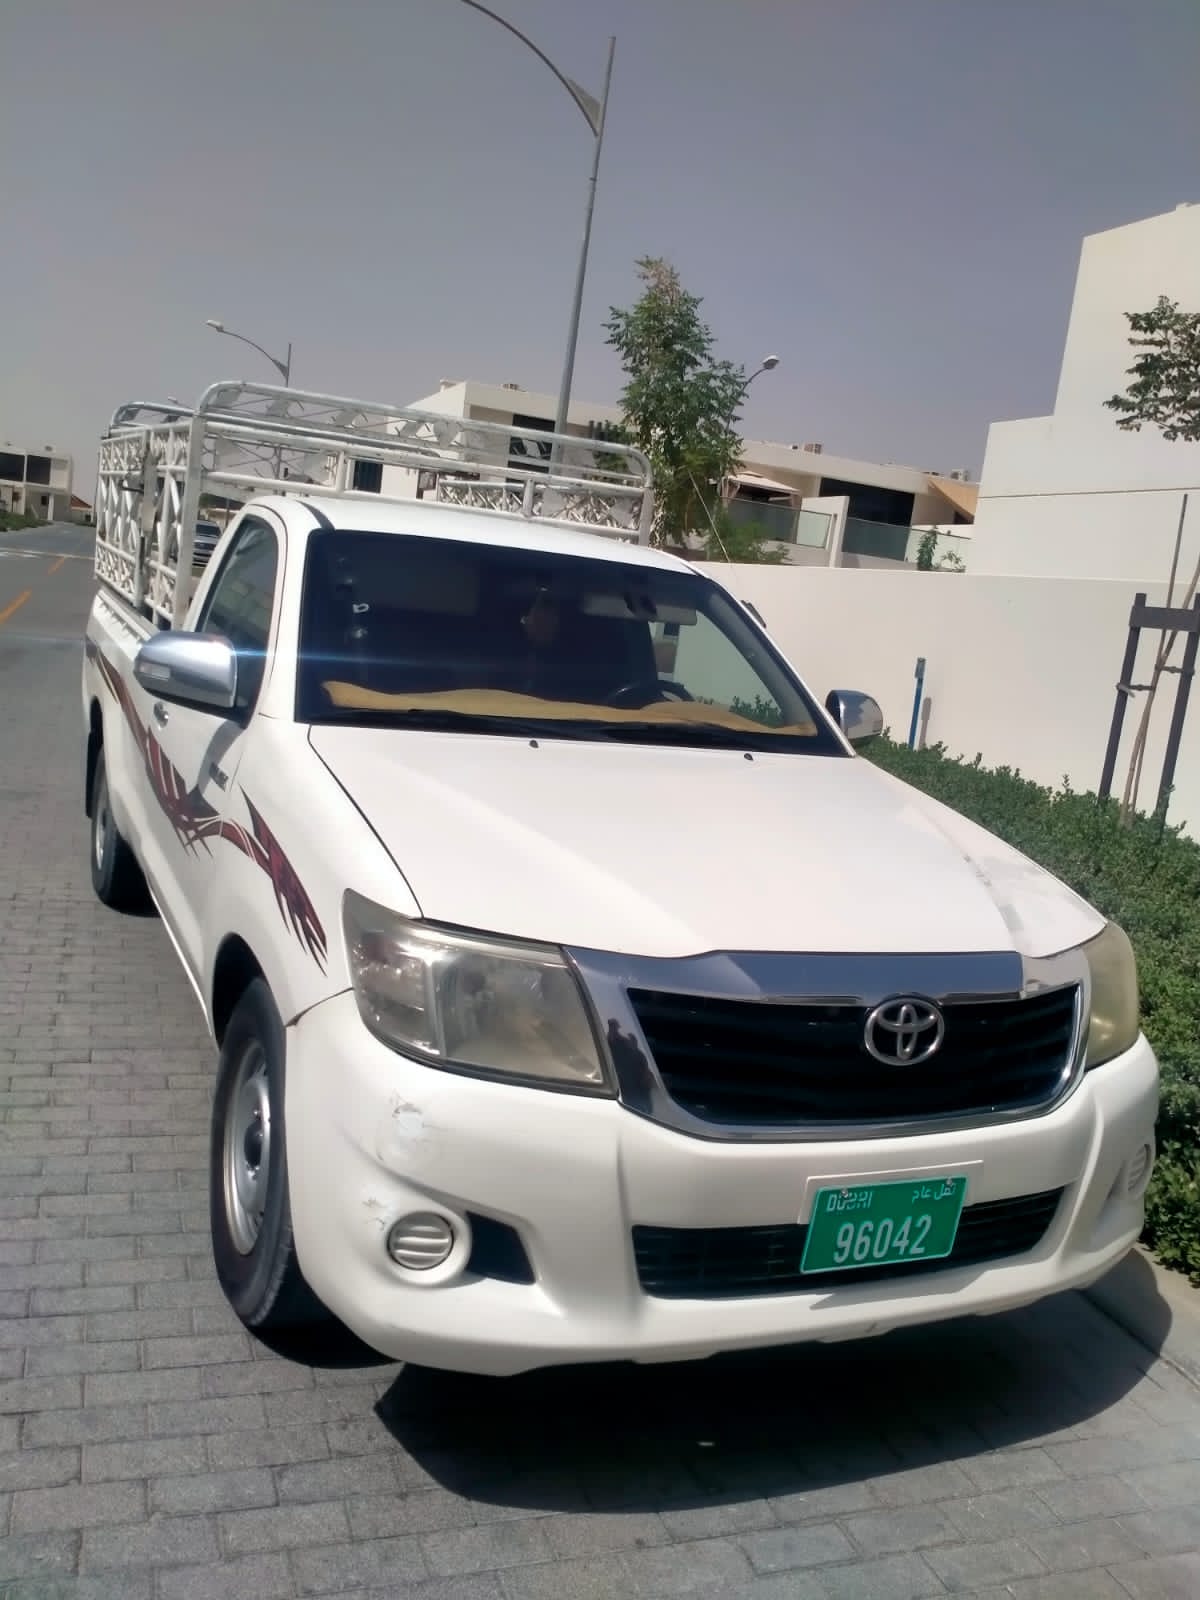 Movers And Packers In Umm Al Quwain | Movers and Packers in Sharjah | Movers And Packers In Al Ruwais | 3 Ton Pickup For Rent in Dubai | 1 Ton Pickup For Rent in Dubai